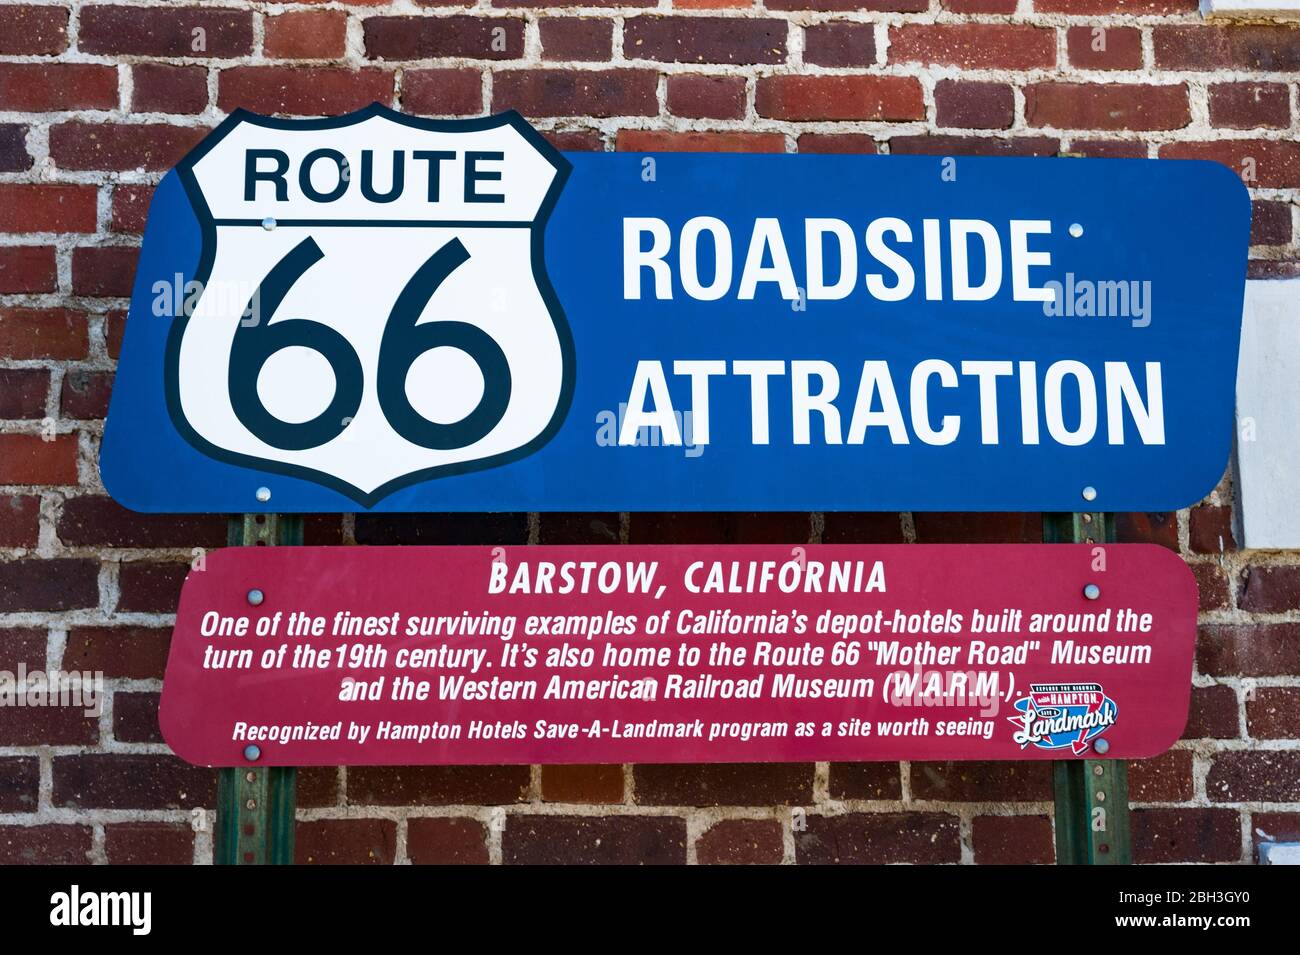 Barstow, California, USA - 23rd April 2013 : Sign for roadsign attraction in historic Barstow Harvey House train station on route 66 Stock Photo